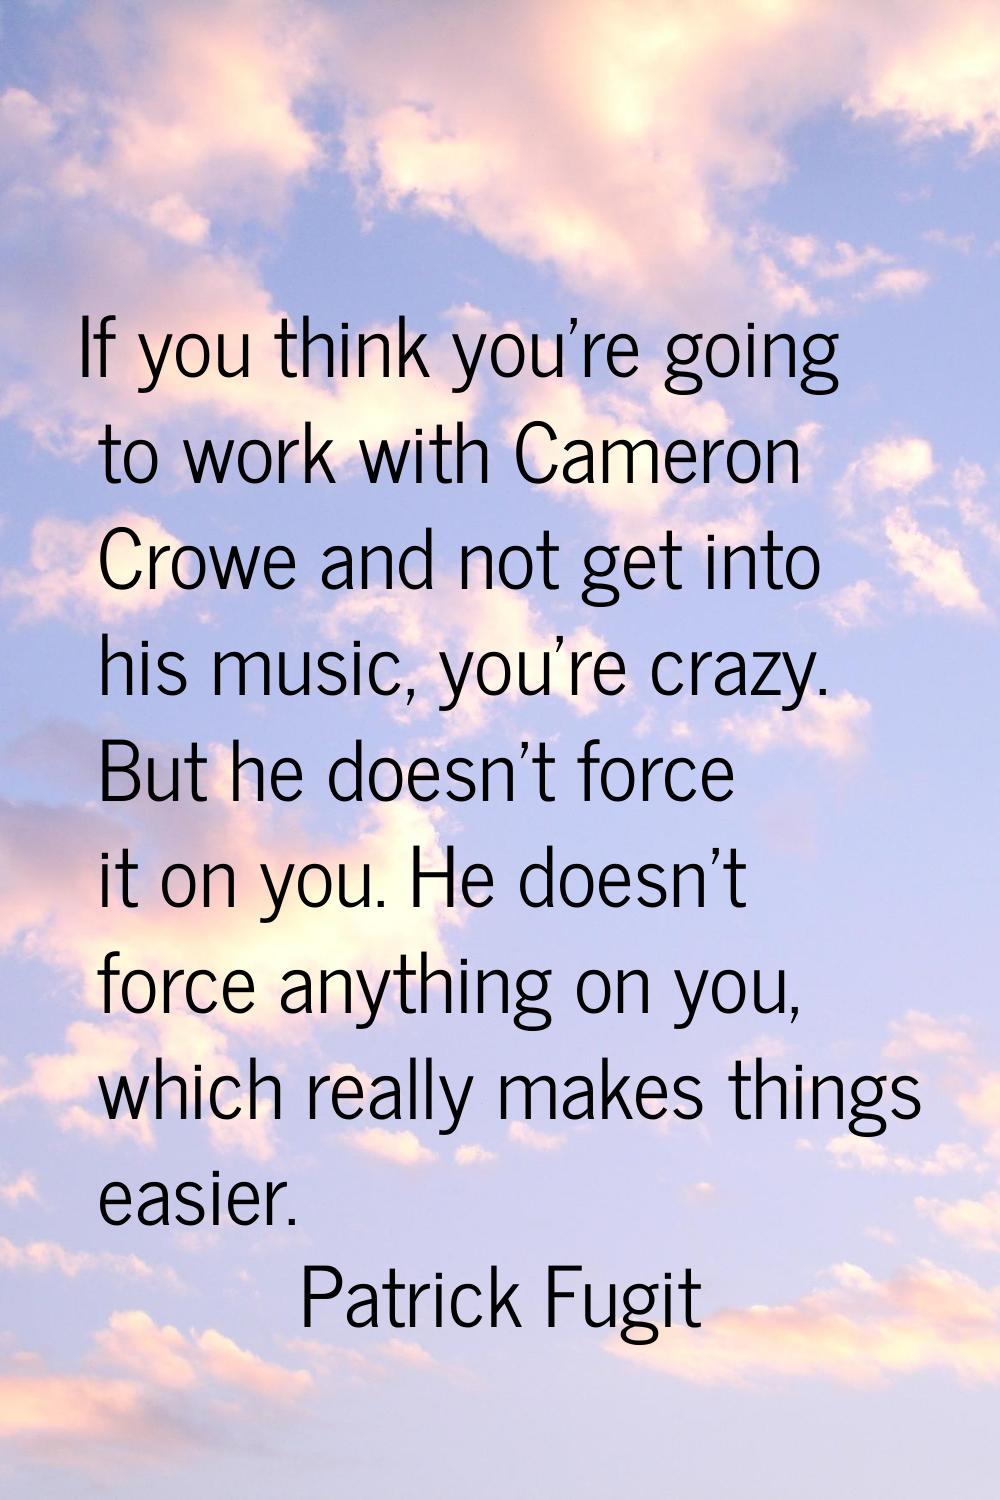 If you think you're going to work with Cameron Crowe and not get into his music, you're crazy. But 